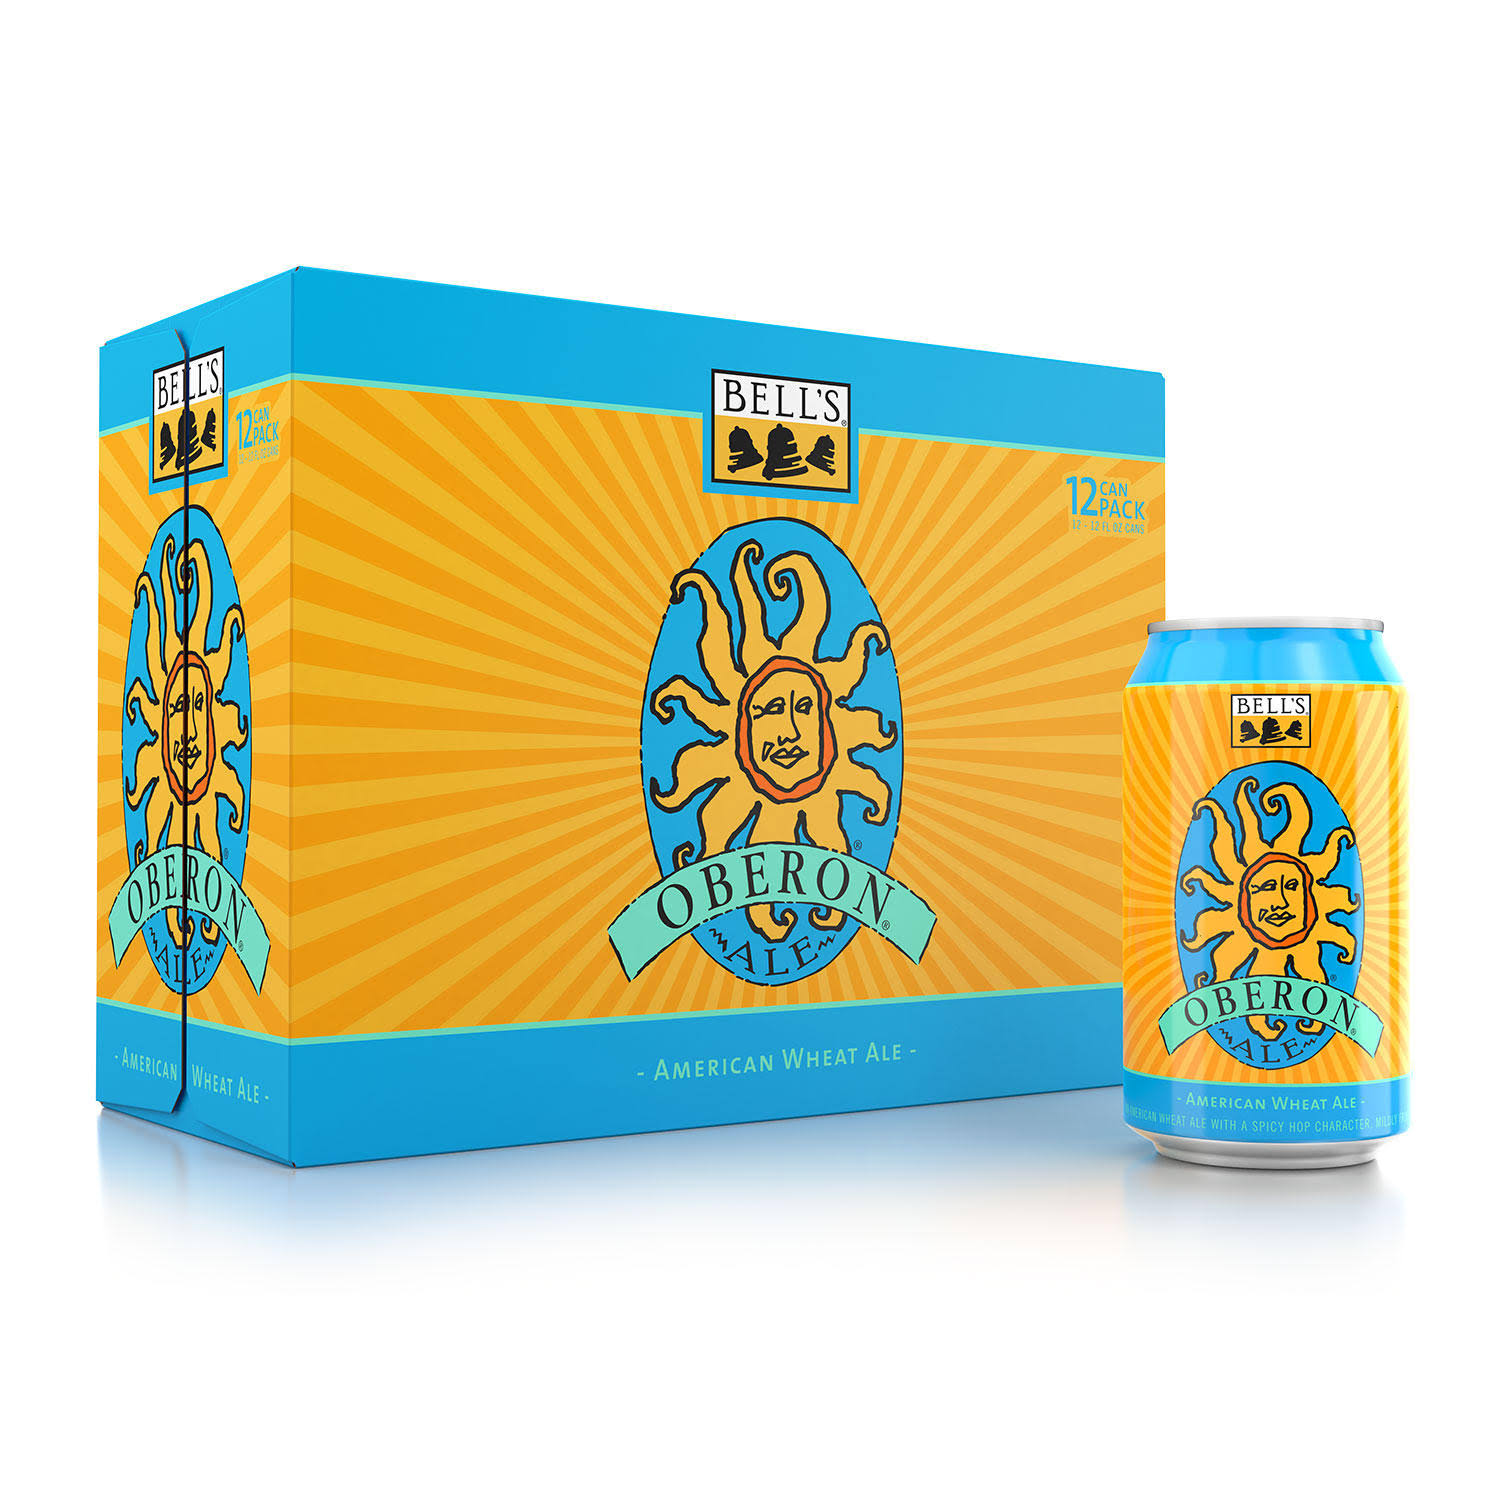 Bell's Beer, Oberon Ale - 12 pack, 12 fl oz cans